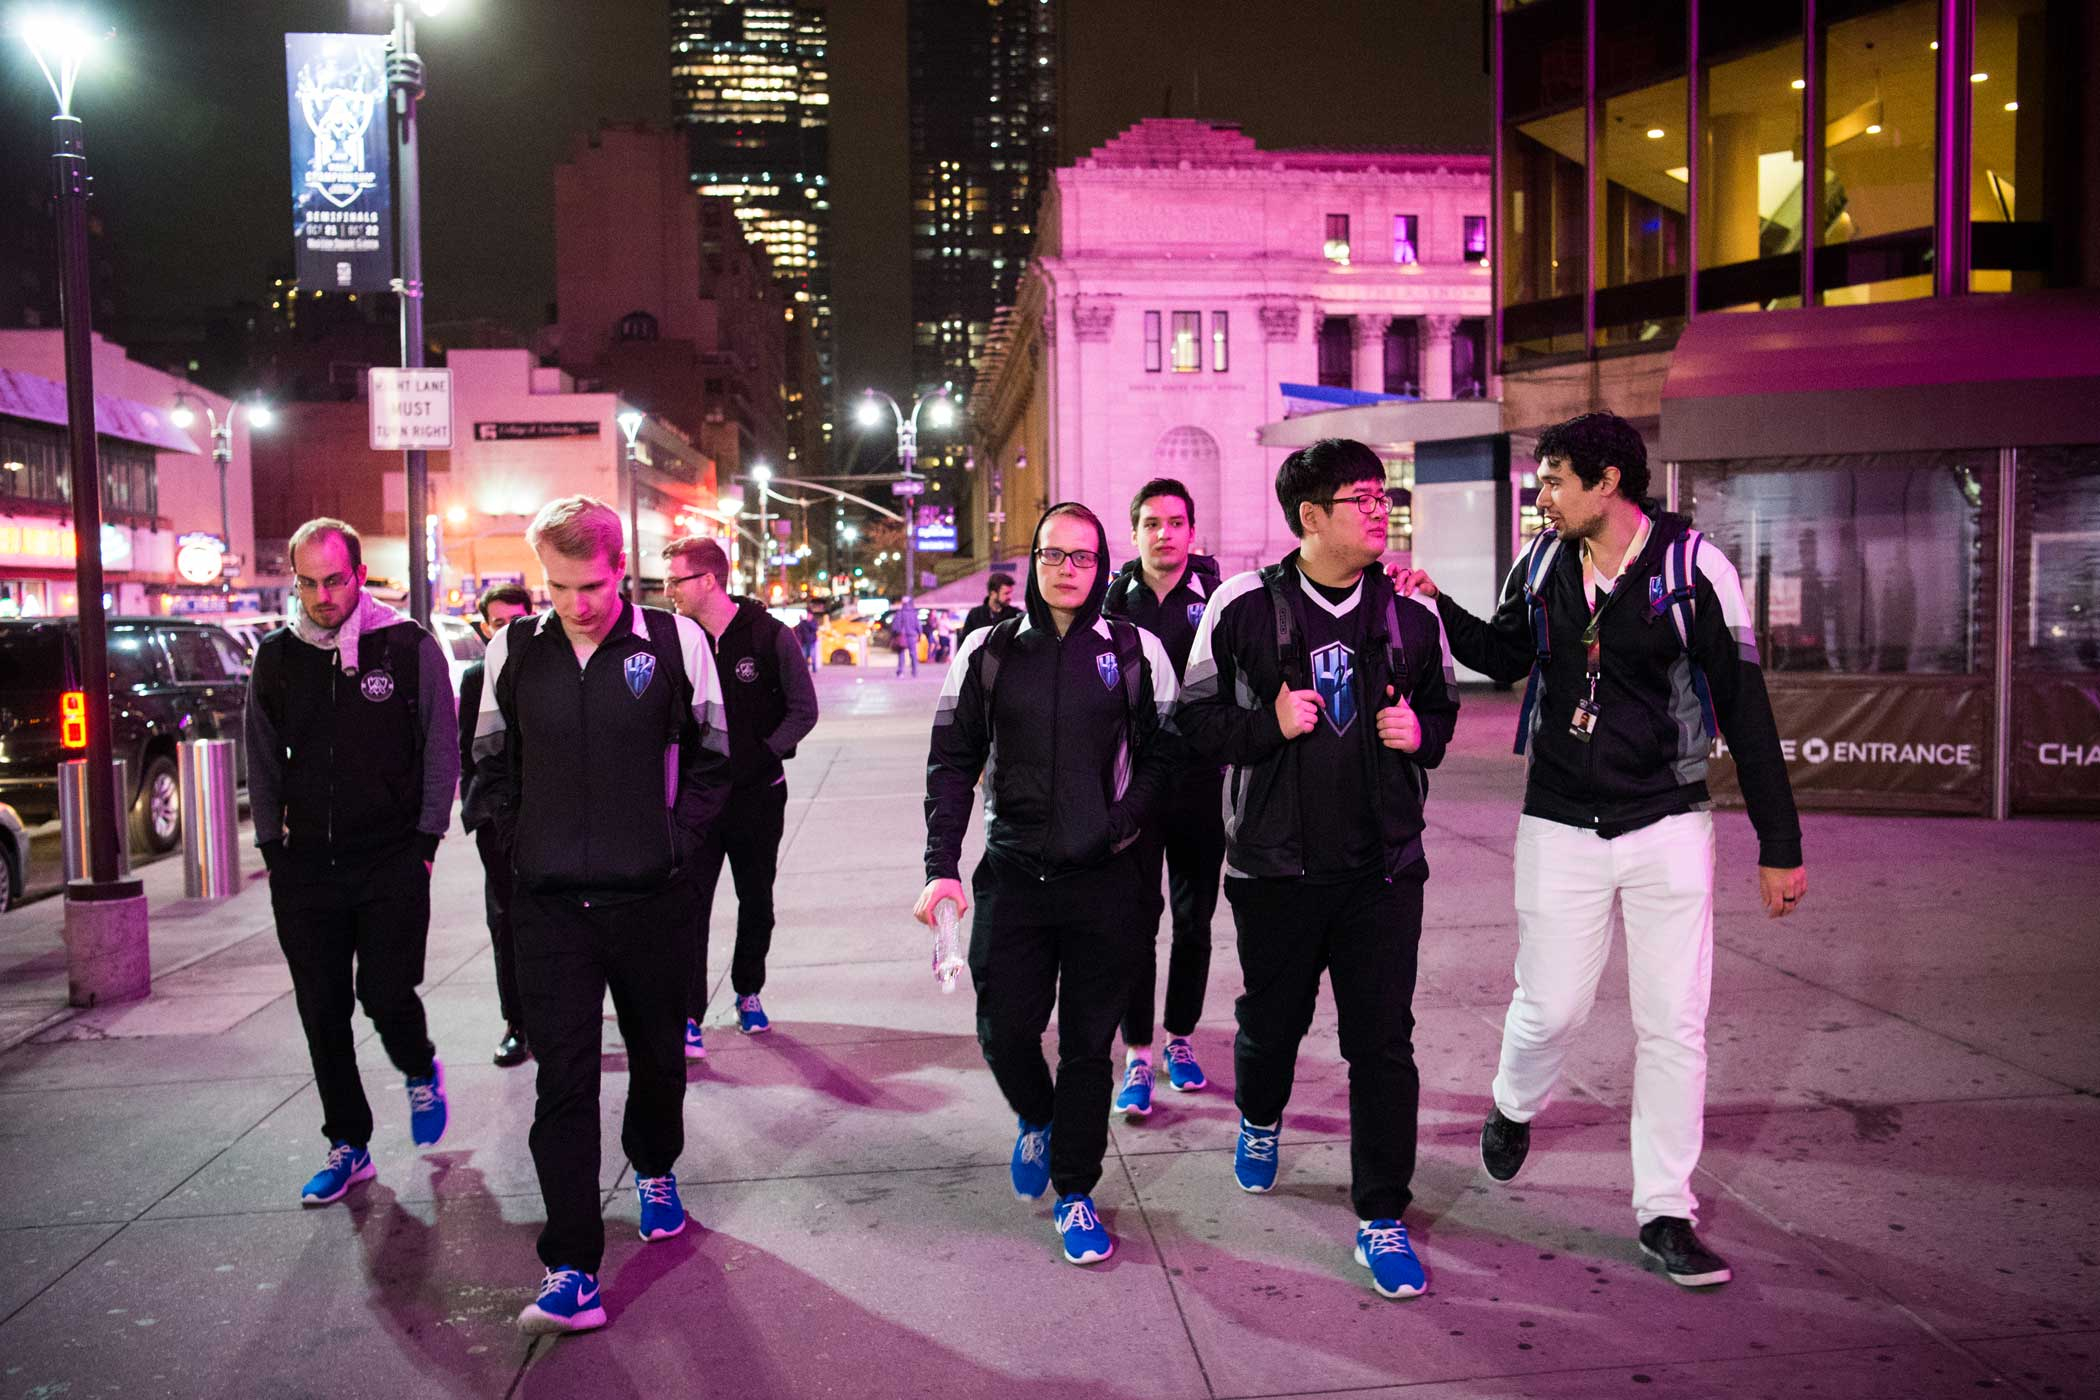 H2k leaves Madison Square Garden after taking photographs with a few fans after their loss to Samsung Galaxy. The team decided to go get Korean barbecue, one of their favorite meals, and splurge on a more expensive meal for one of their last nights together before heading to their respective home countries. Mark Kauzlarich for TIME